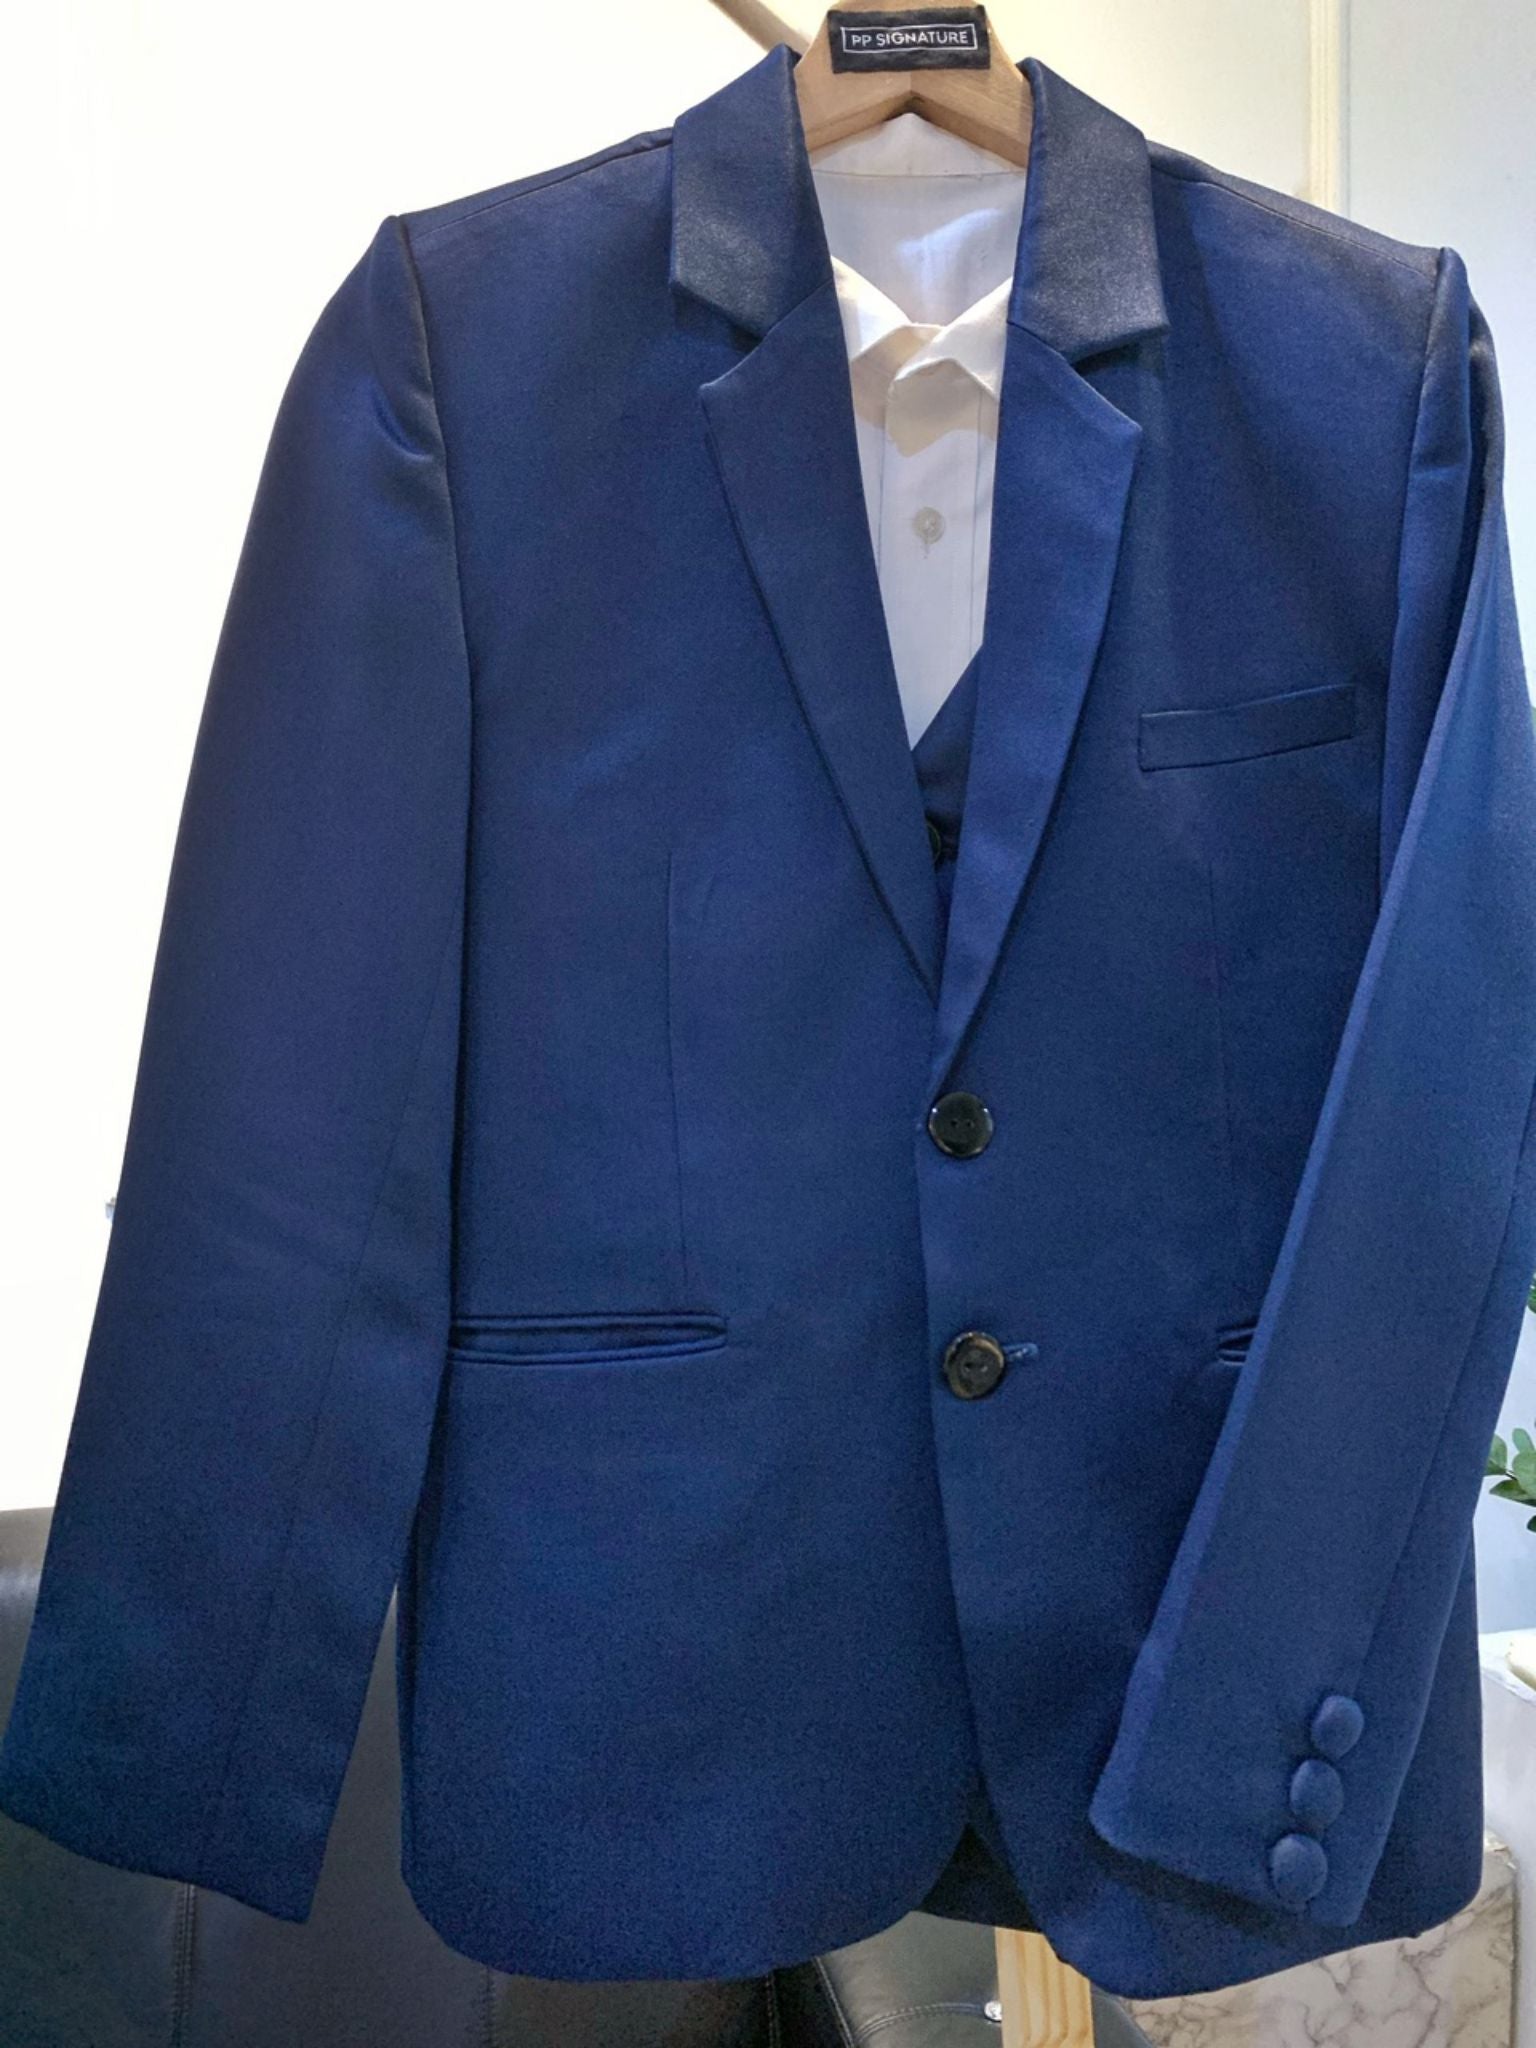 Blue suit jacket hanging on a wooden hanger. The jacket is made of a light blue fabric and has a single-breasted design with a notch lapel. It is suitable for formal occasions, such as weddings or job interviews.